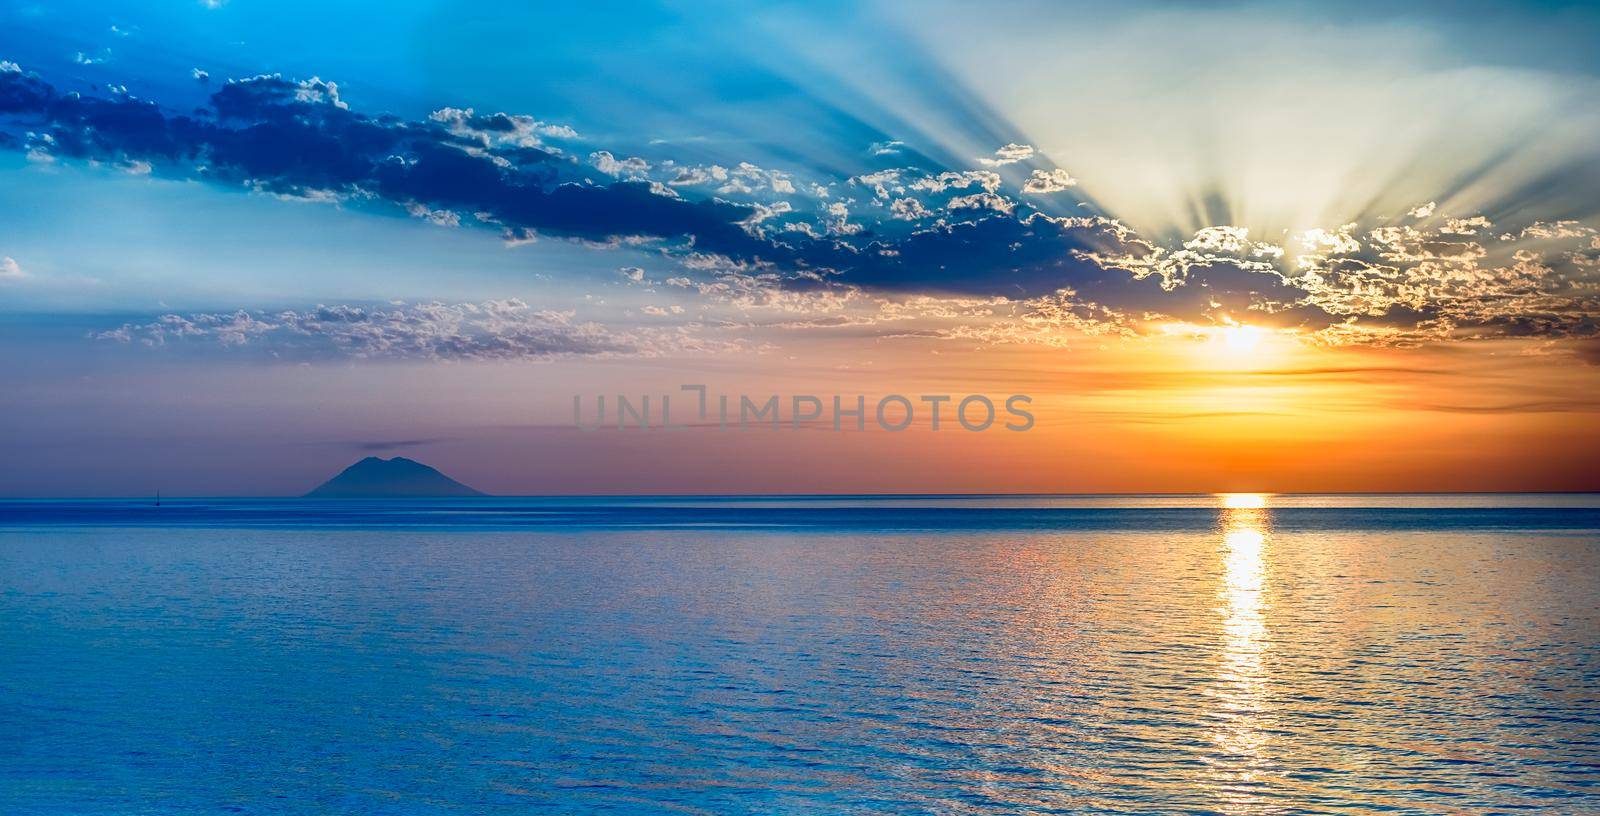 Scenic sunset with view over Stromboli Volcano from Tropea, Italy by marcorubino